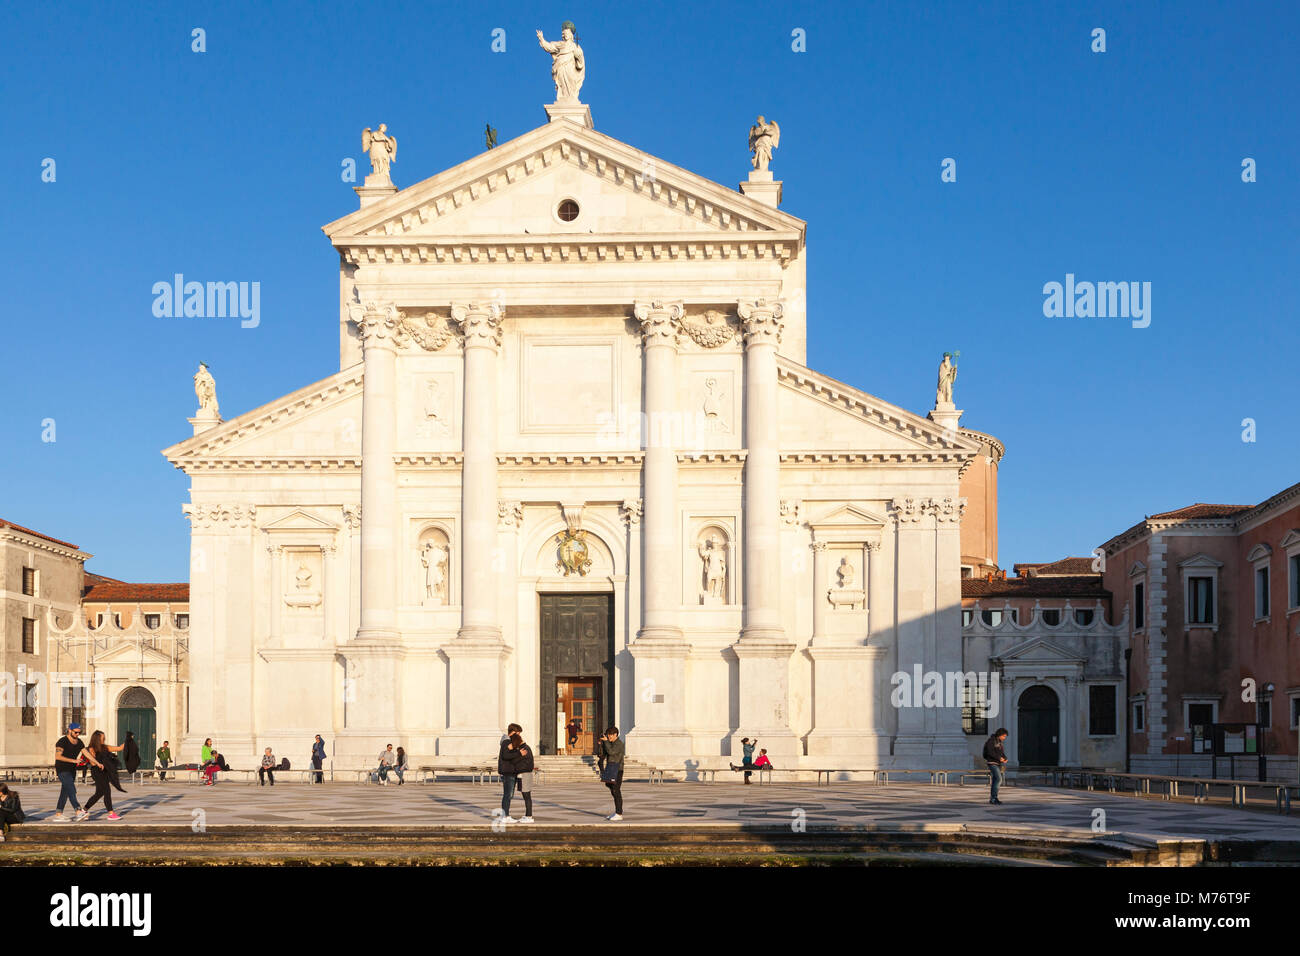 San Giorgio Maggiore church front facade at sunset with tourists ...